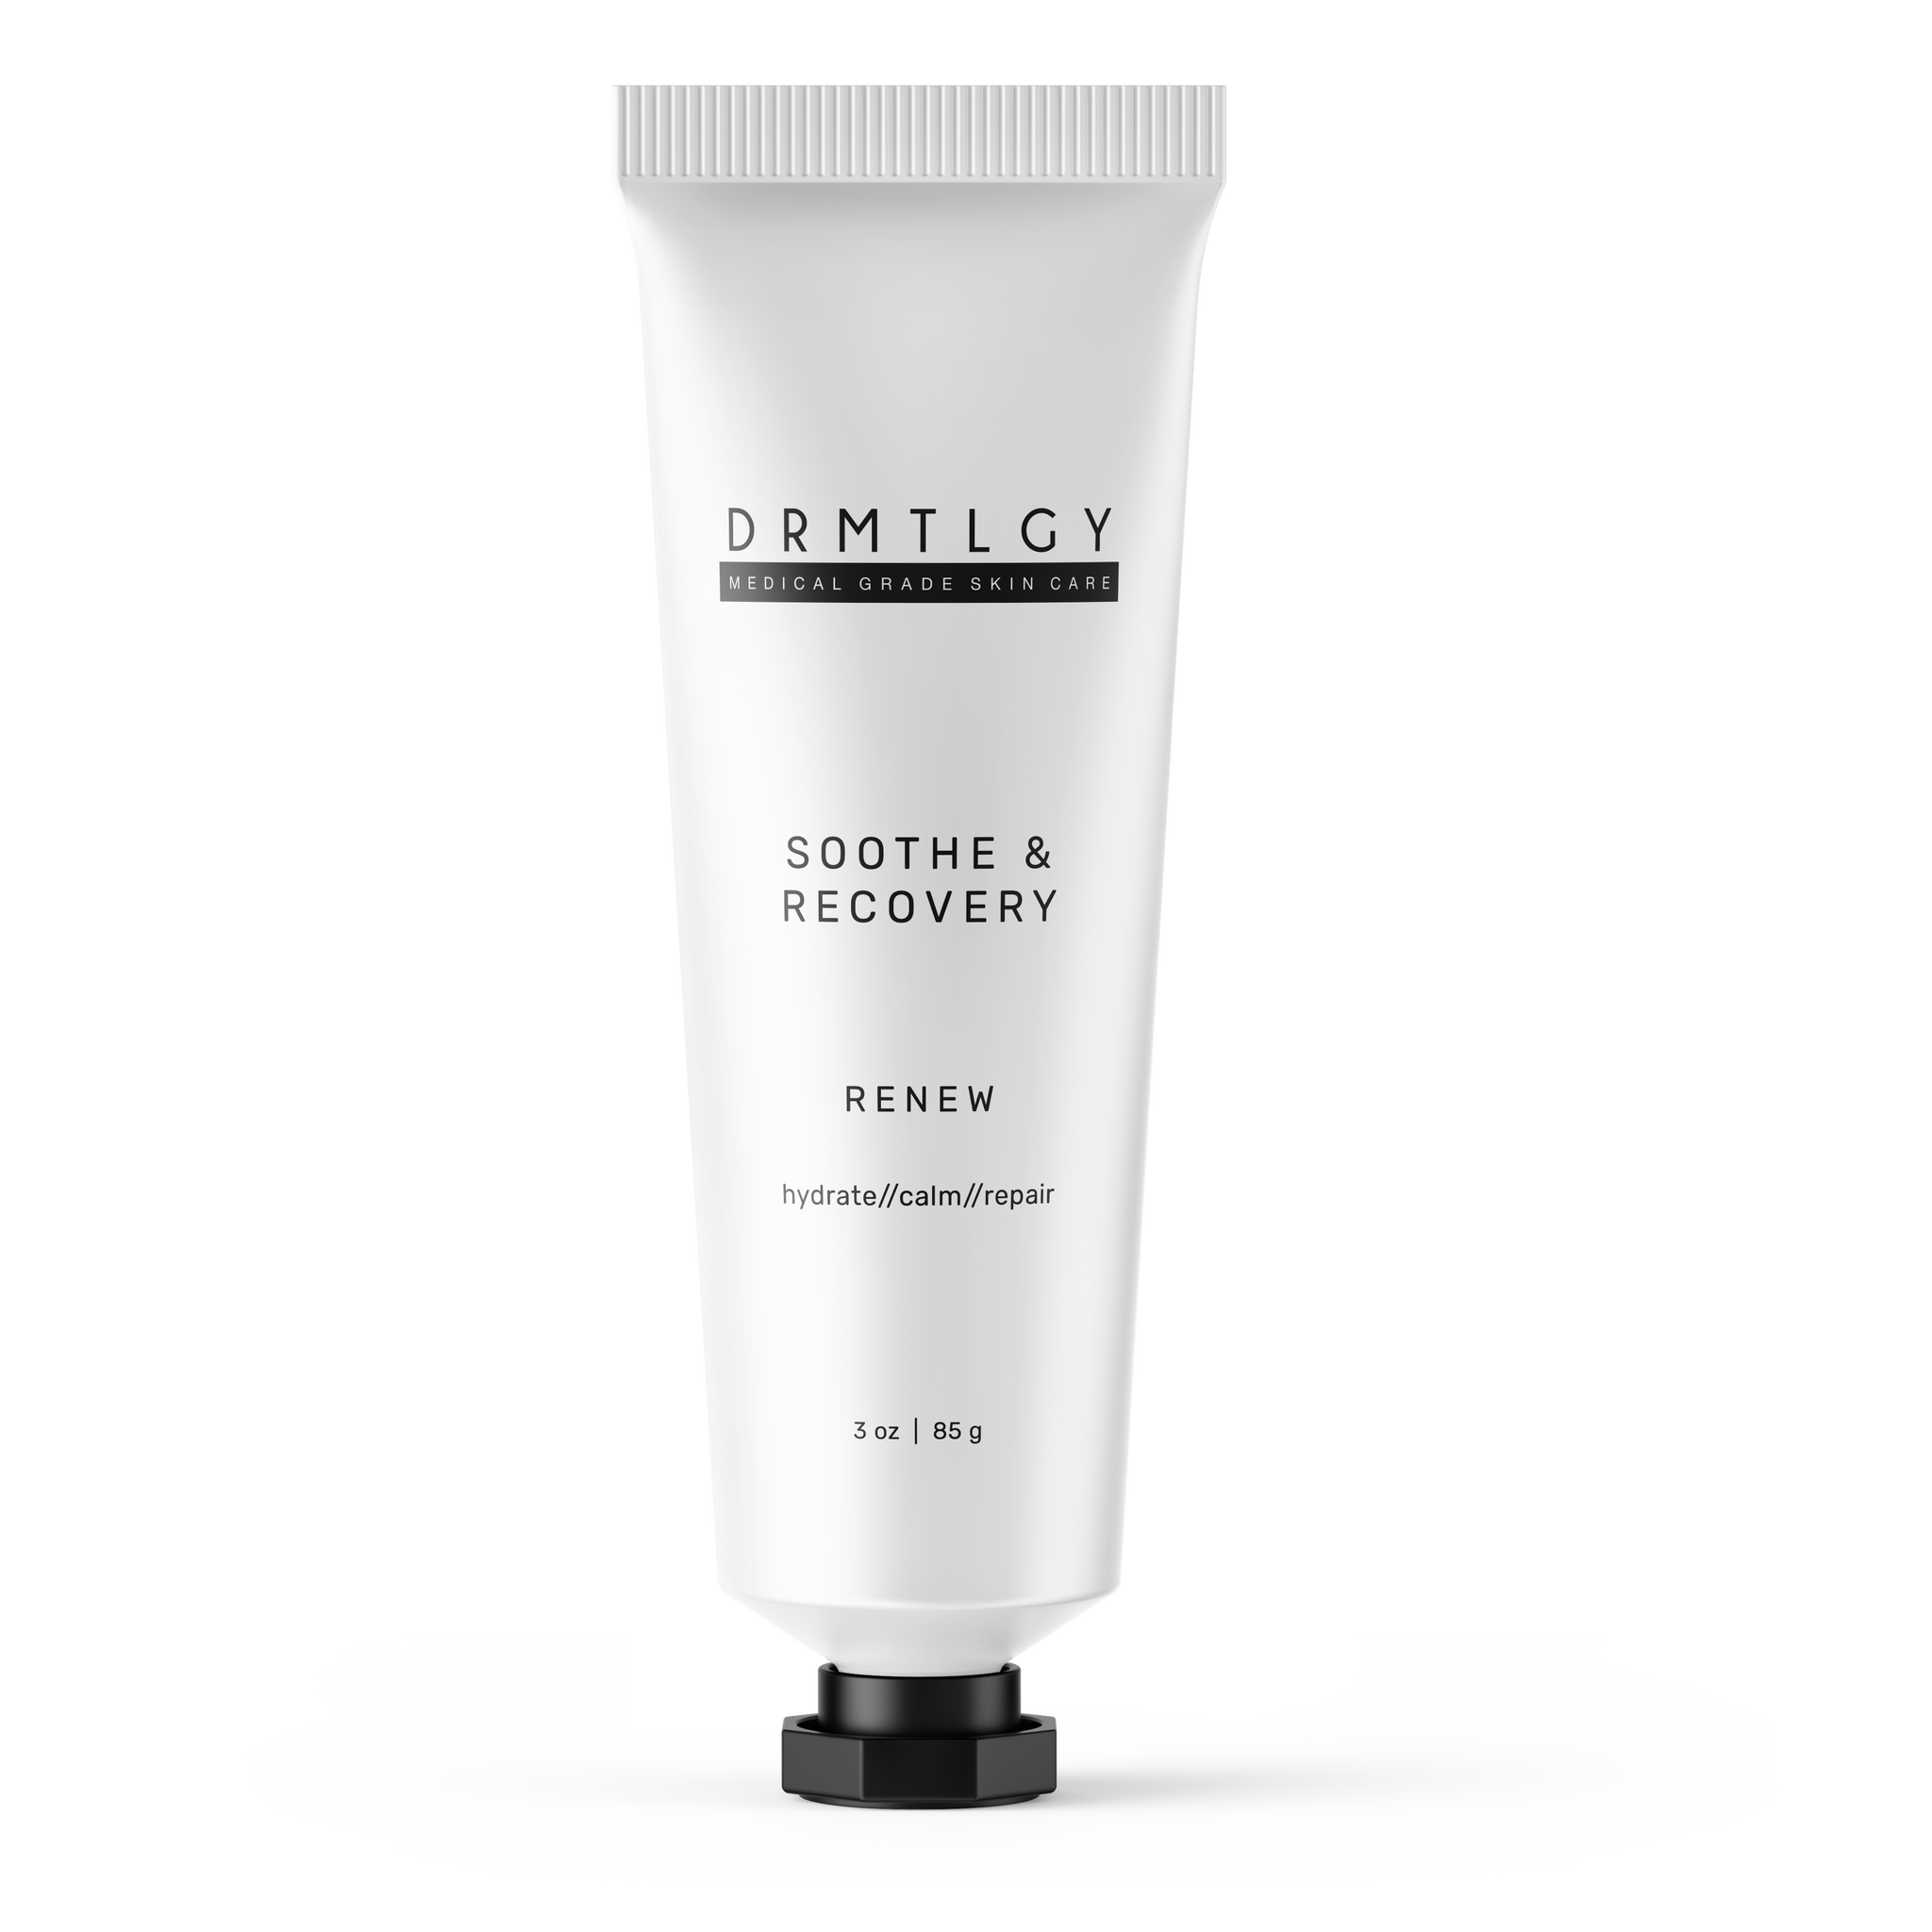 Soothe & Recovery Cream